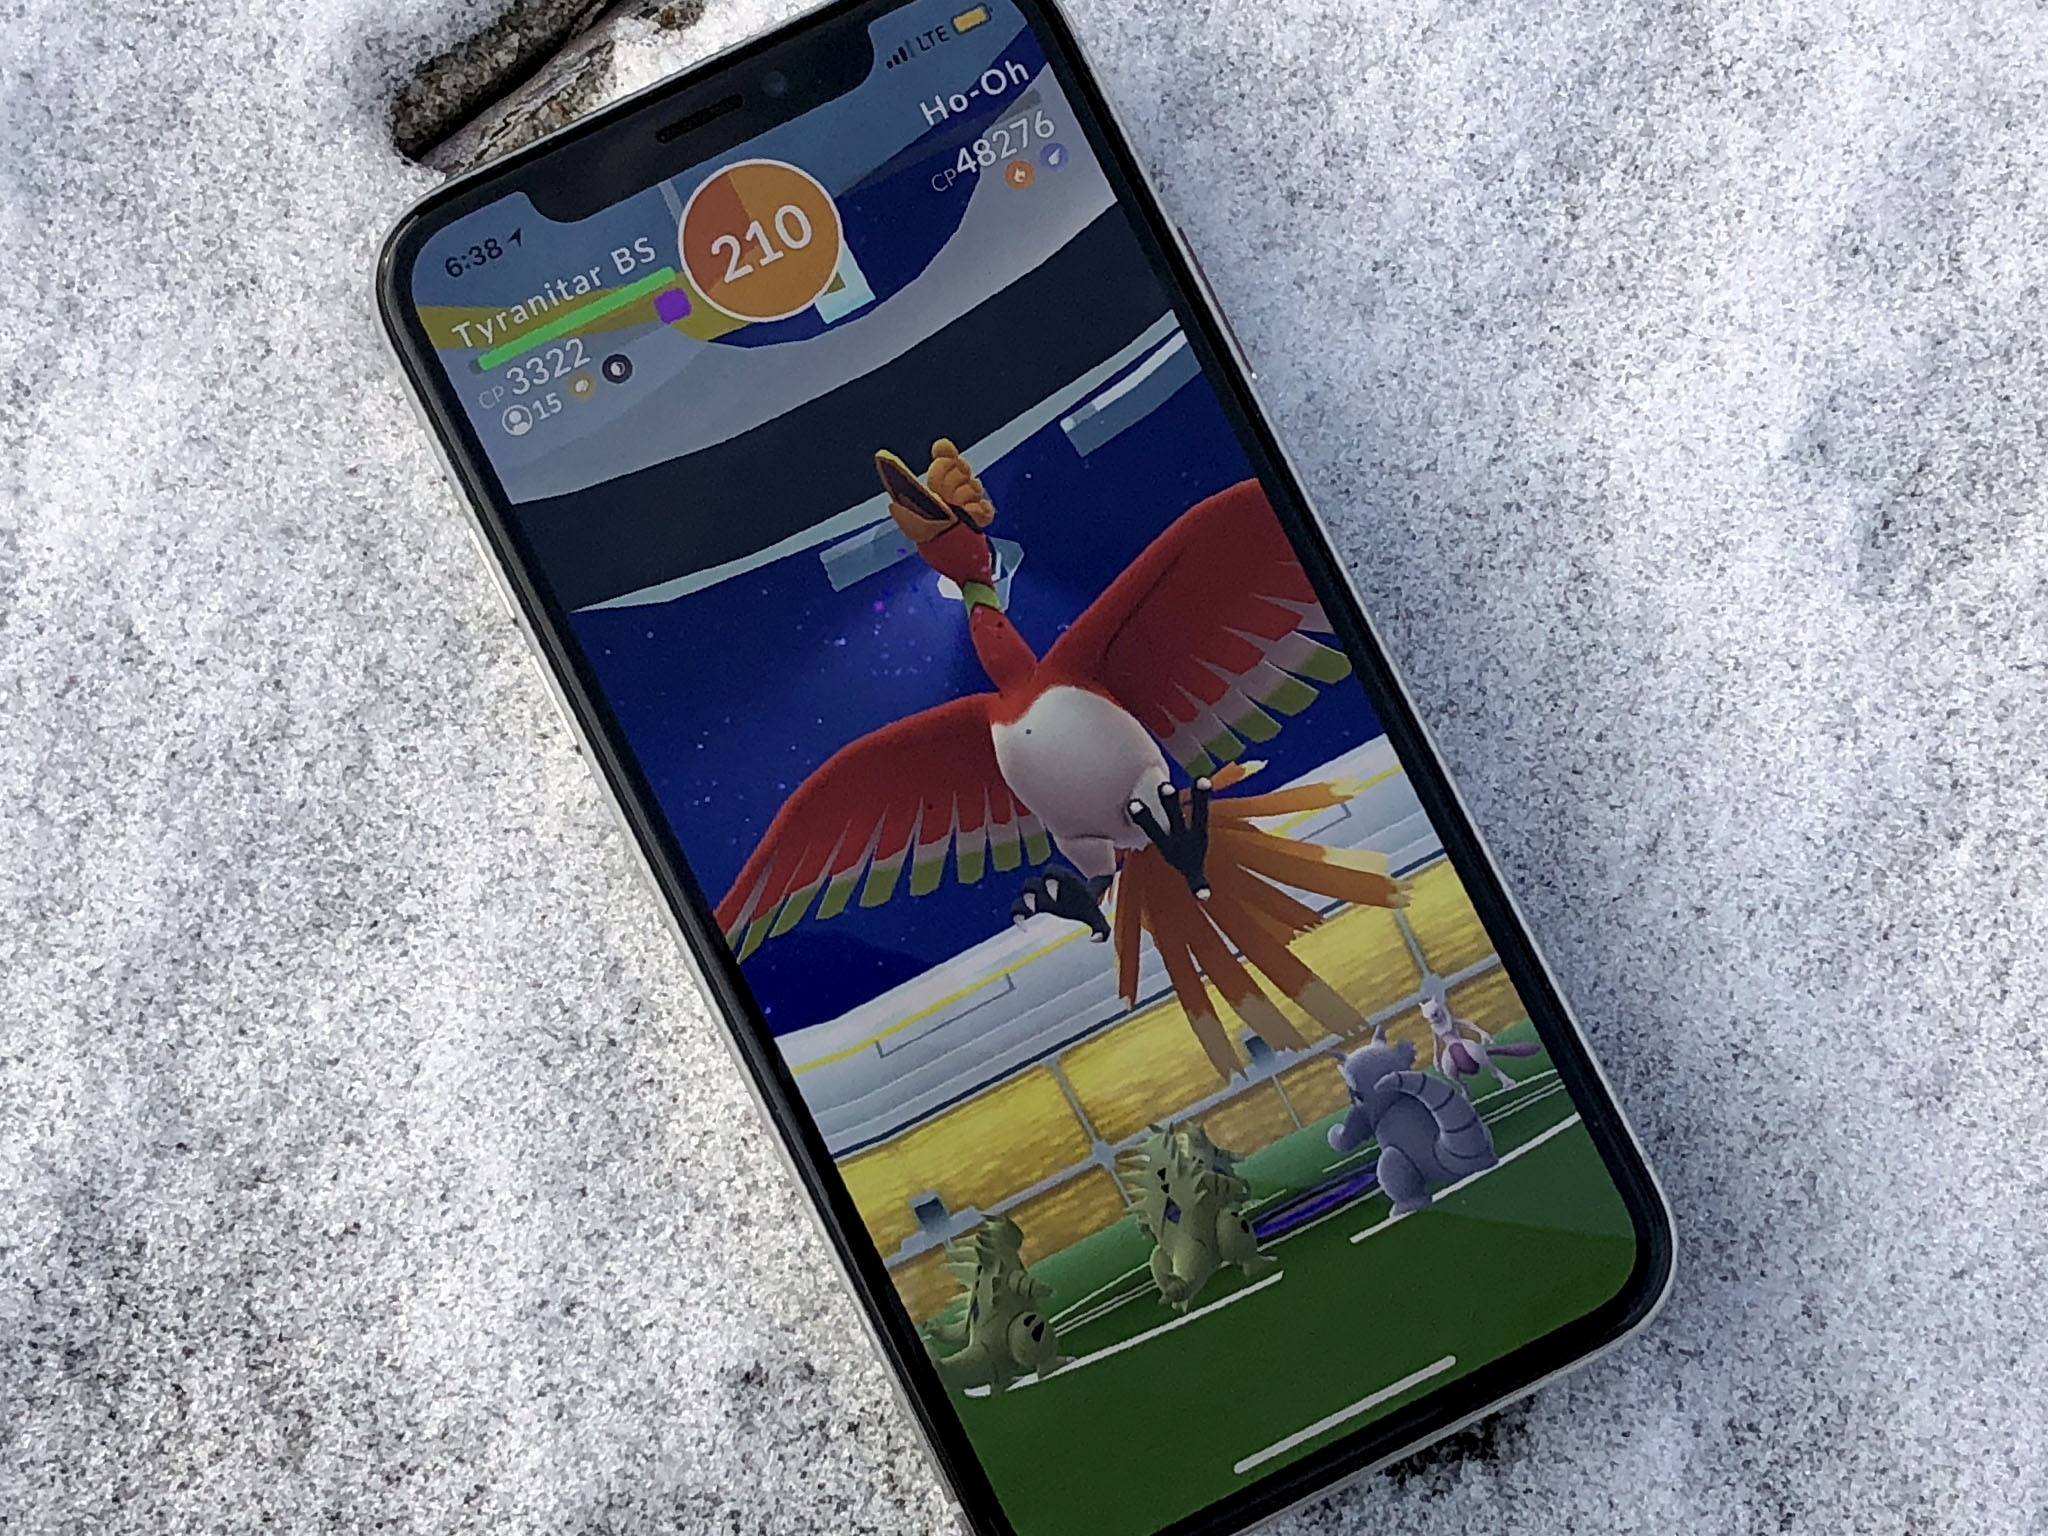 How To Beat The Ho-Oh Raid In Pokemon Go